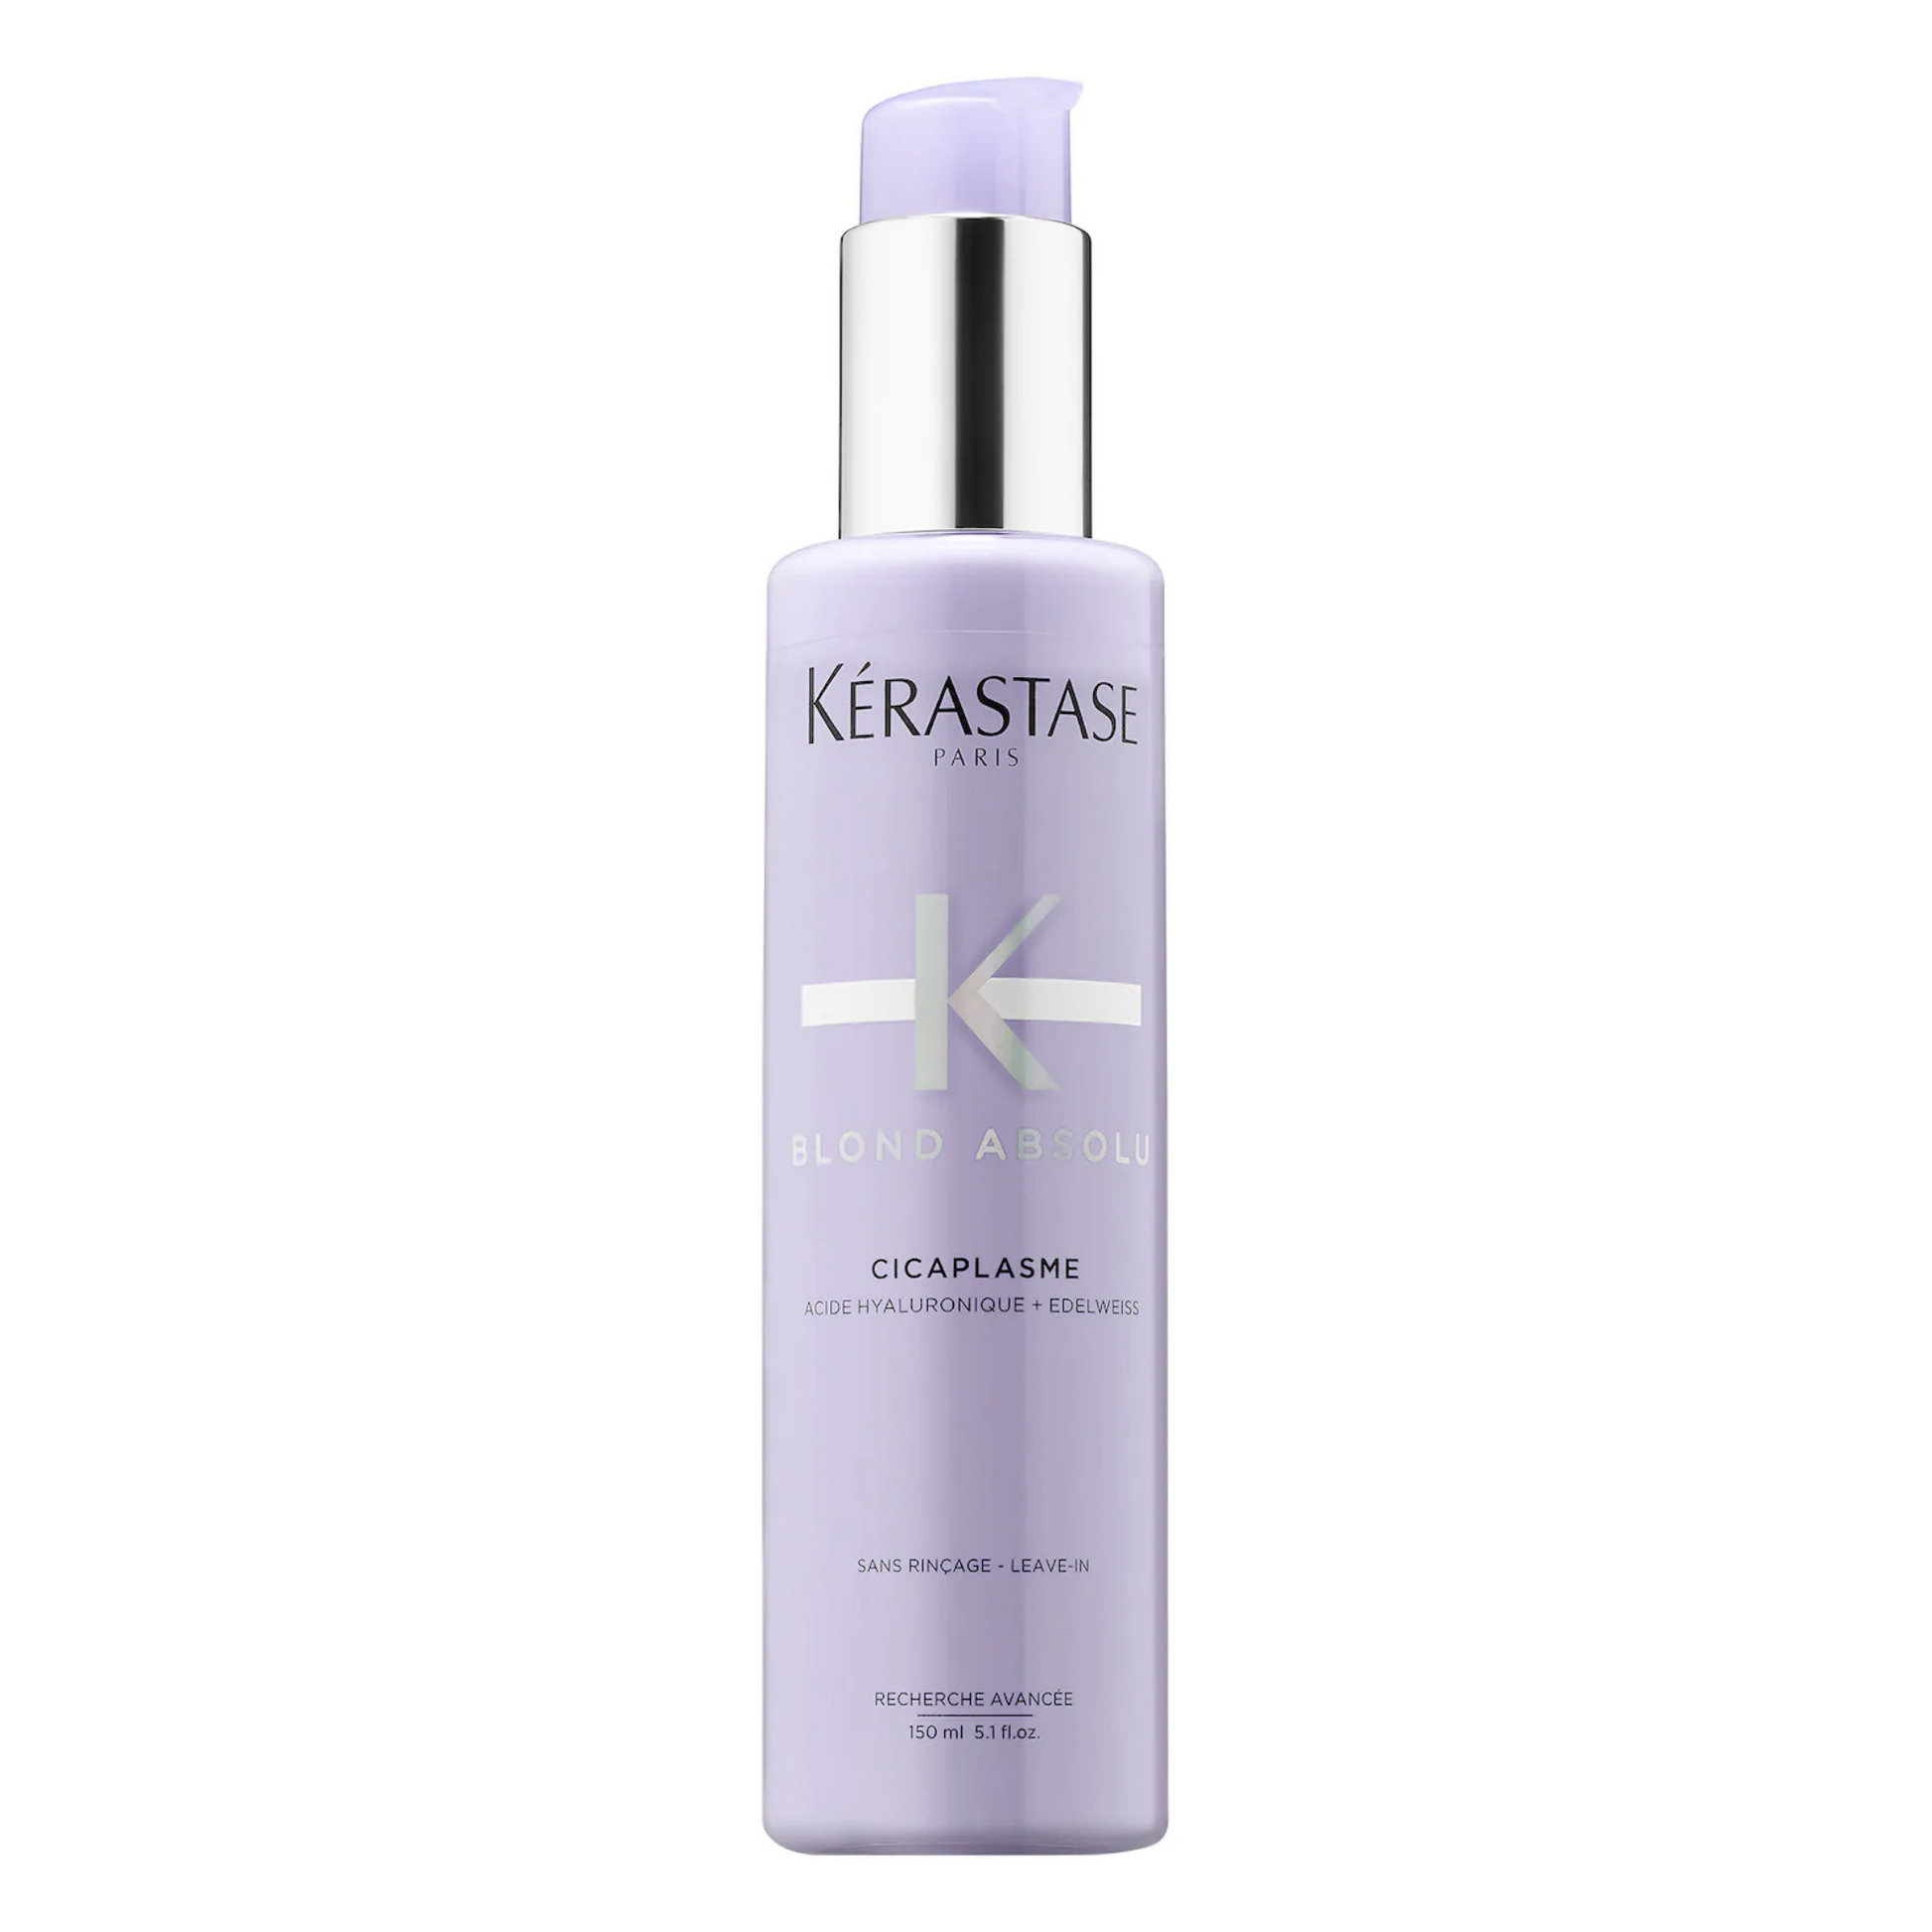 Cicaplasme  Blond Absolu This opalescent lavender-colored leave-in cream fortifies sensitized faux-blonde, lightened, highlighted and grey hair. Enriched with Hyaluronic Acid and Edelweiss flower, Cicaplasme seals split ends and smoothes the hair fiber for a uniform touch and long-lasting frizz control. It instantly treats the damaged areas of the fiber. 